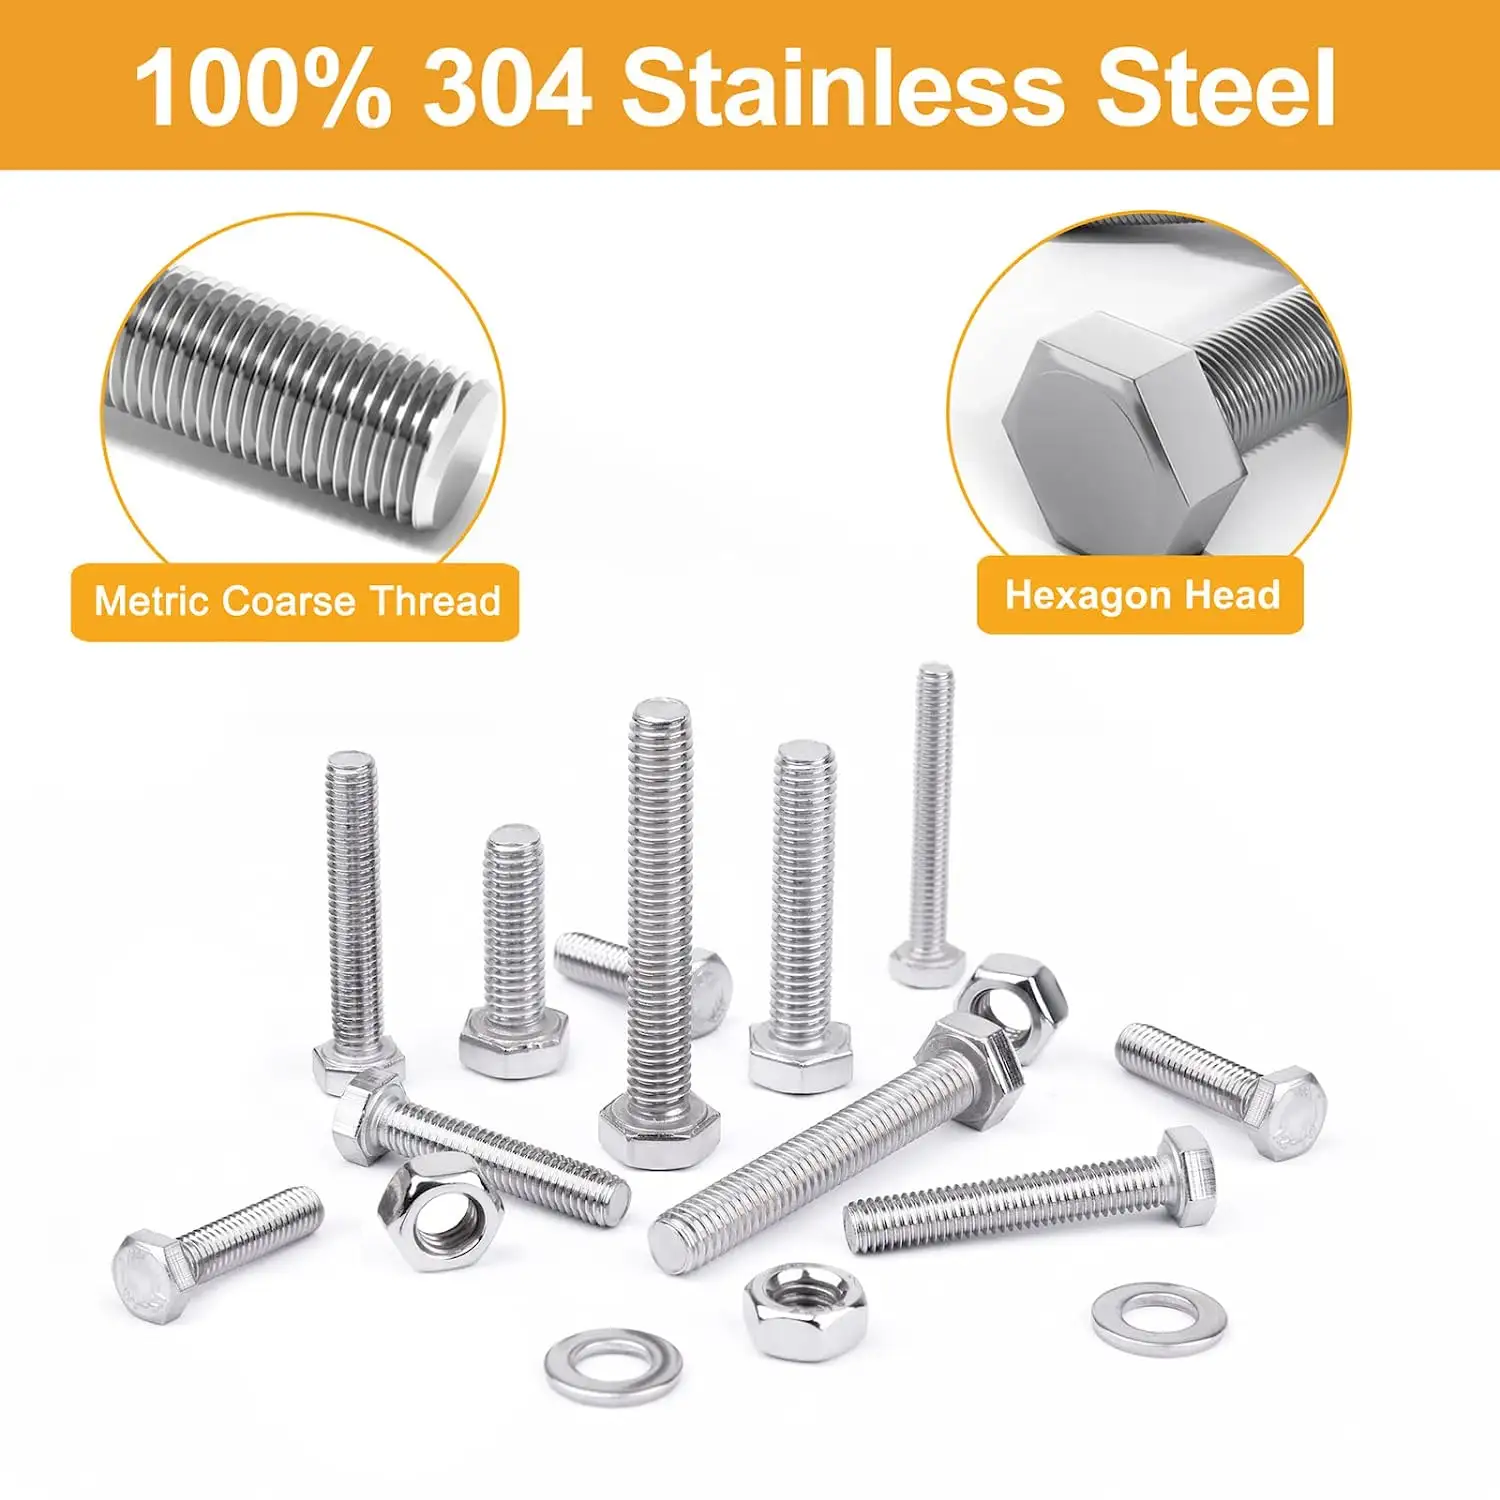 HCH Manufacturing Wholesale Price All kinds of stainless steel hexagon bolts and nuts Screw washers Metric